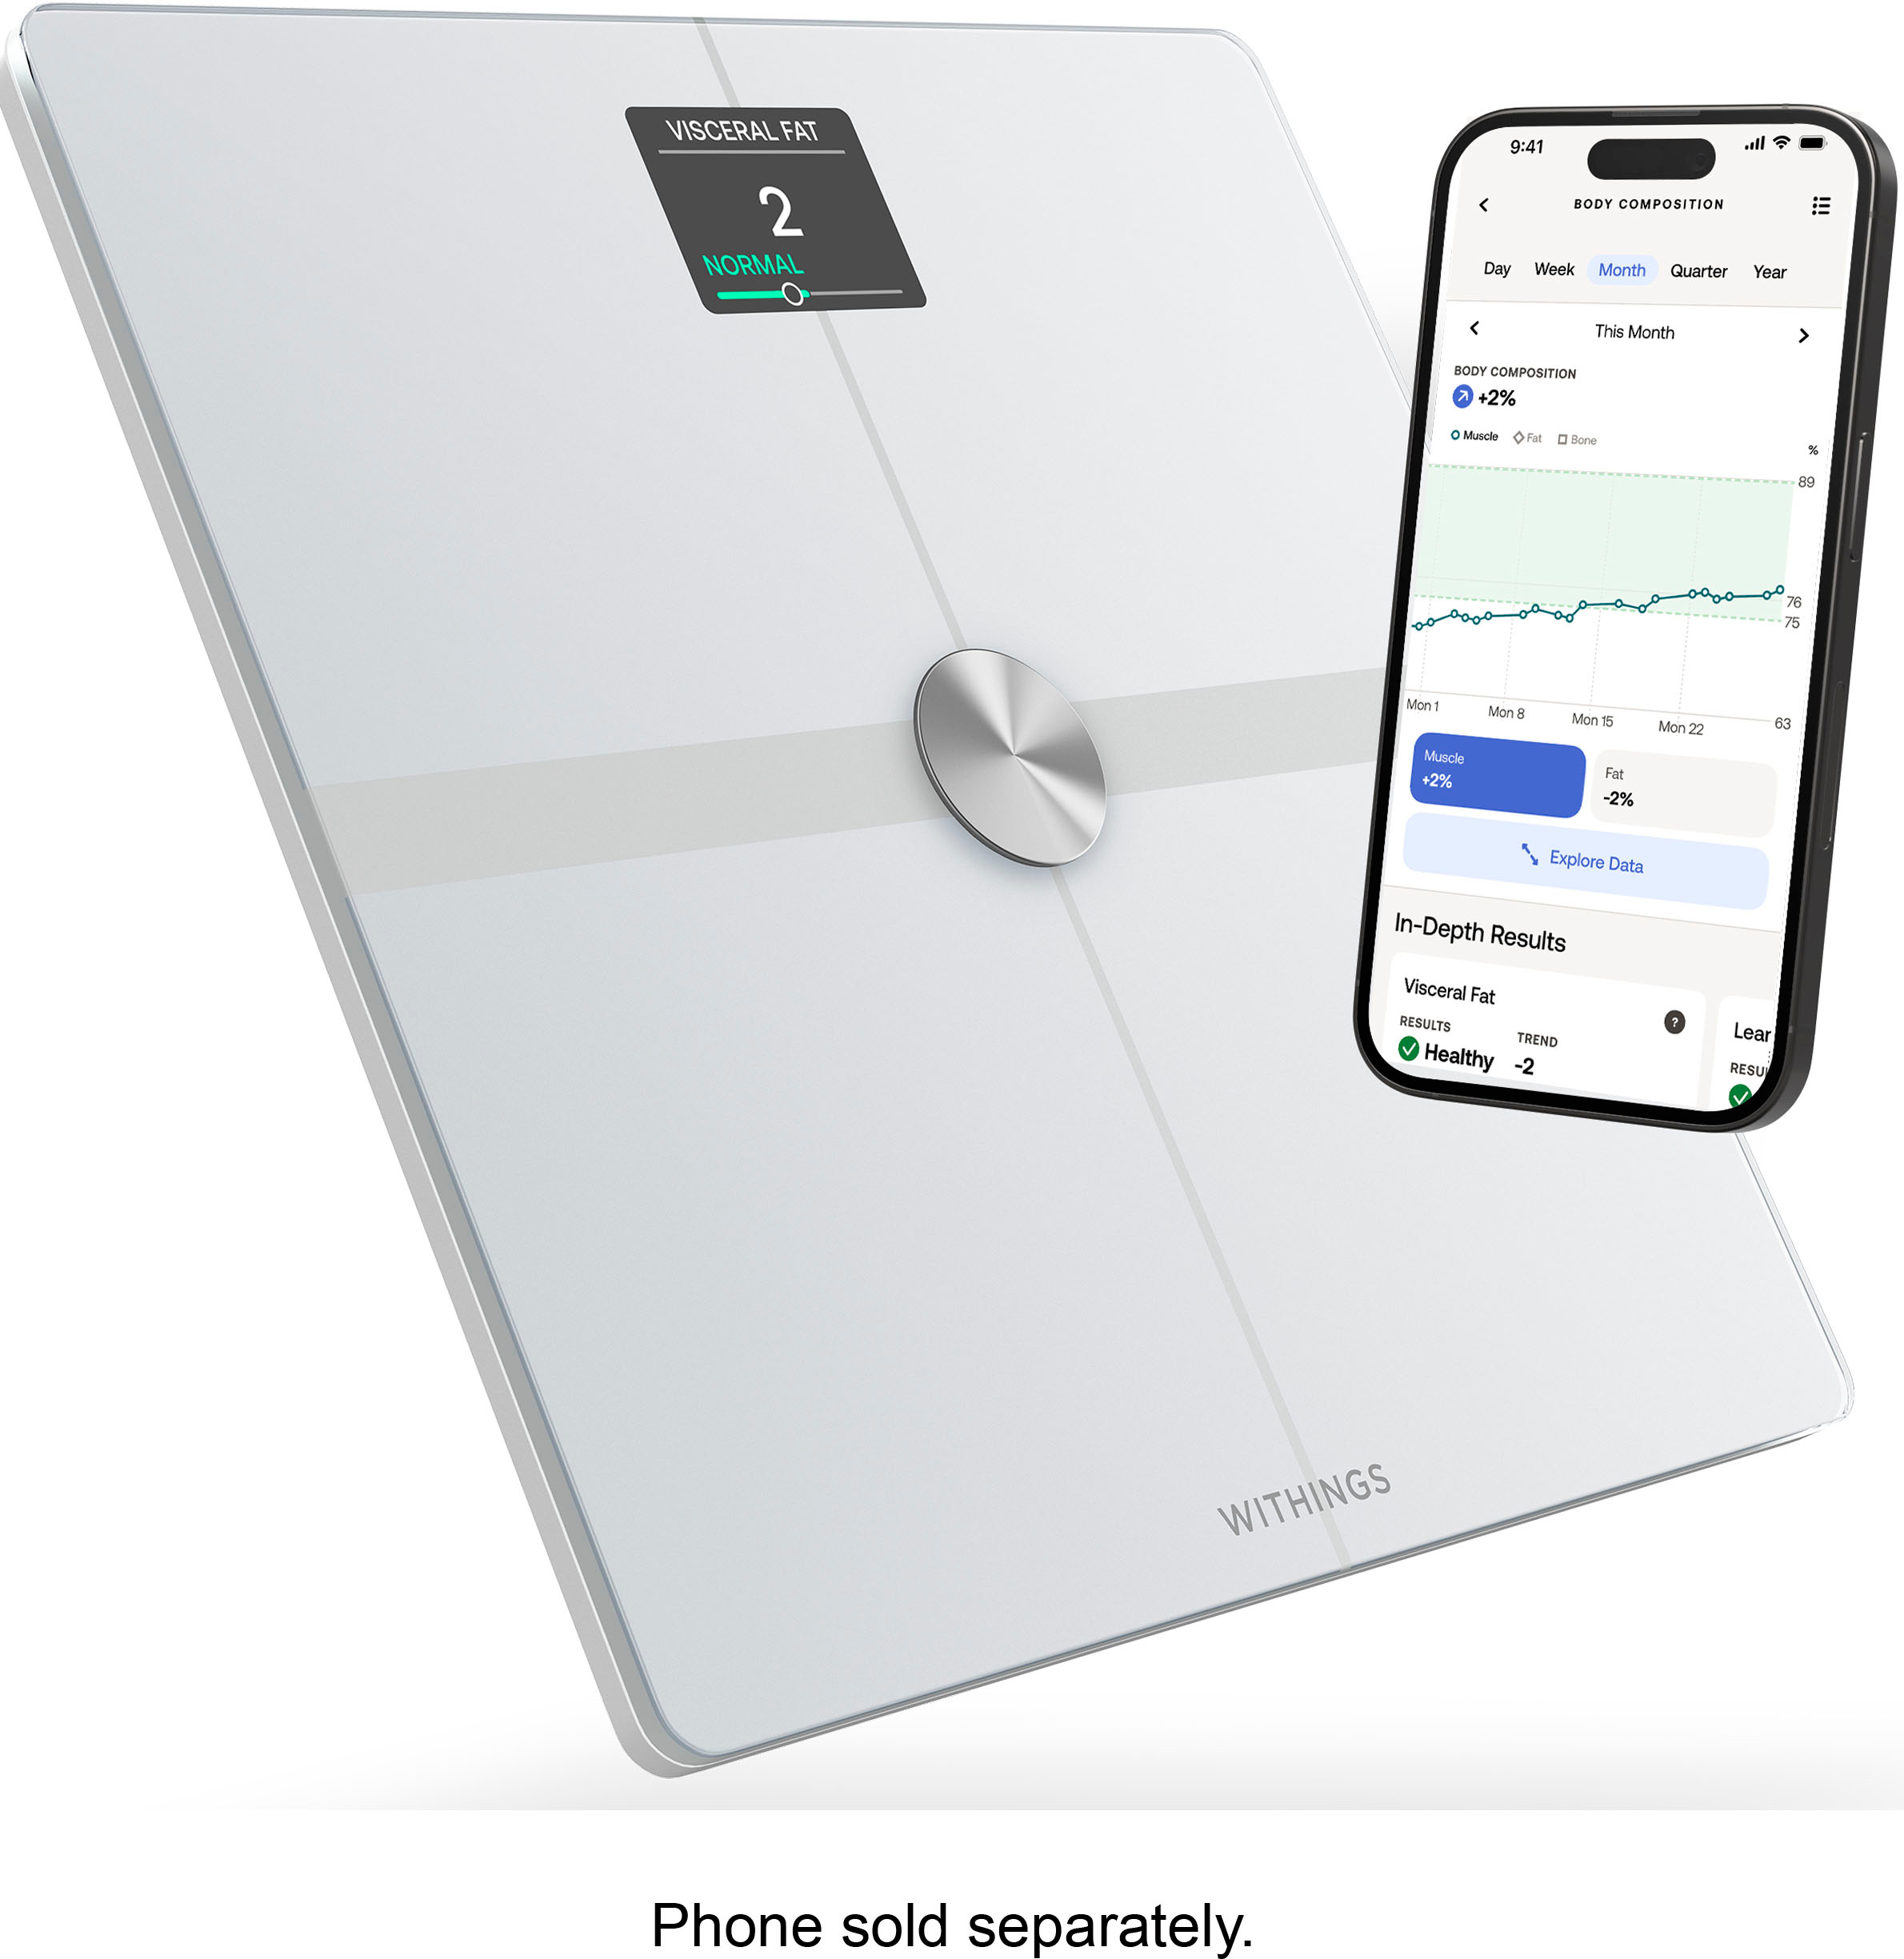 Etekcity Smart WiFi Body Fat and Composition Scale Review and Unboxing 